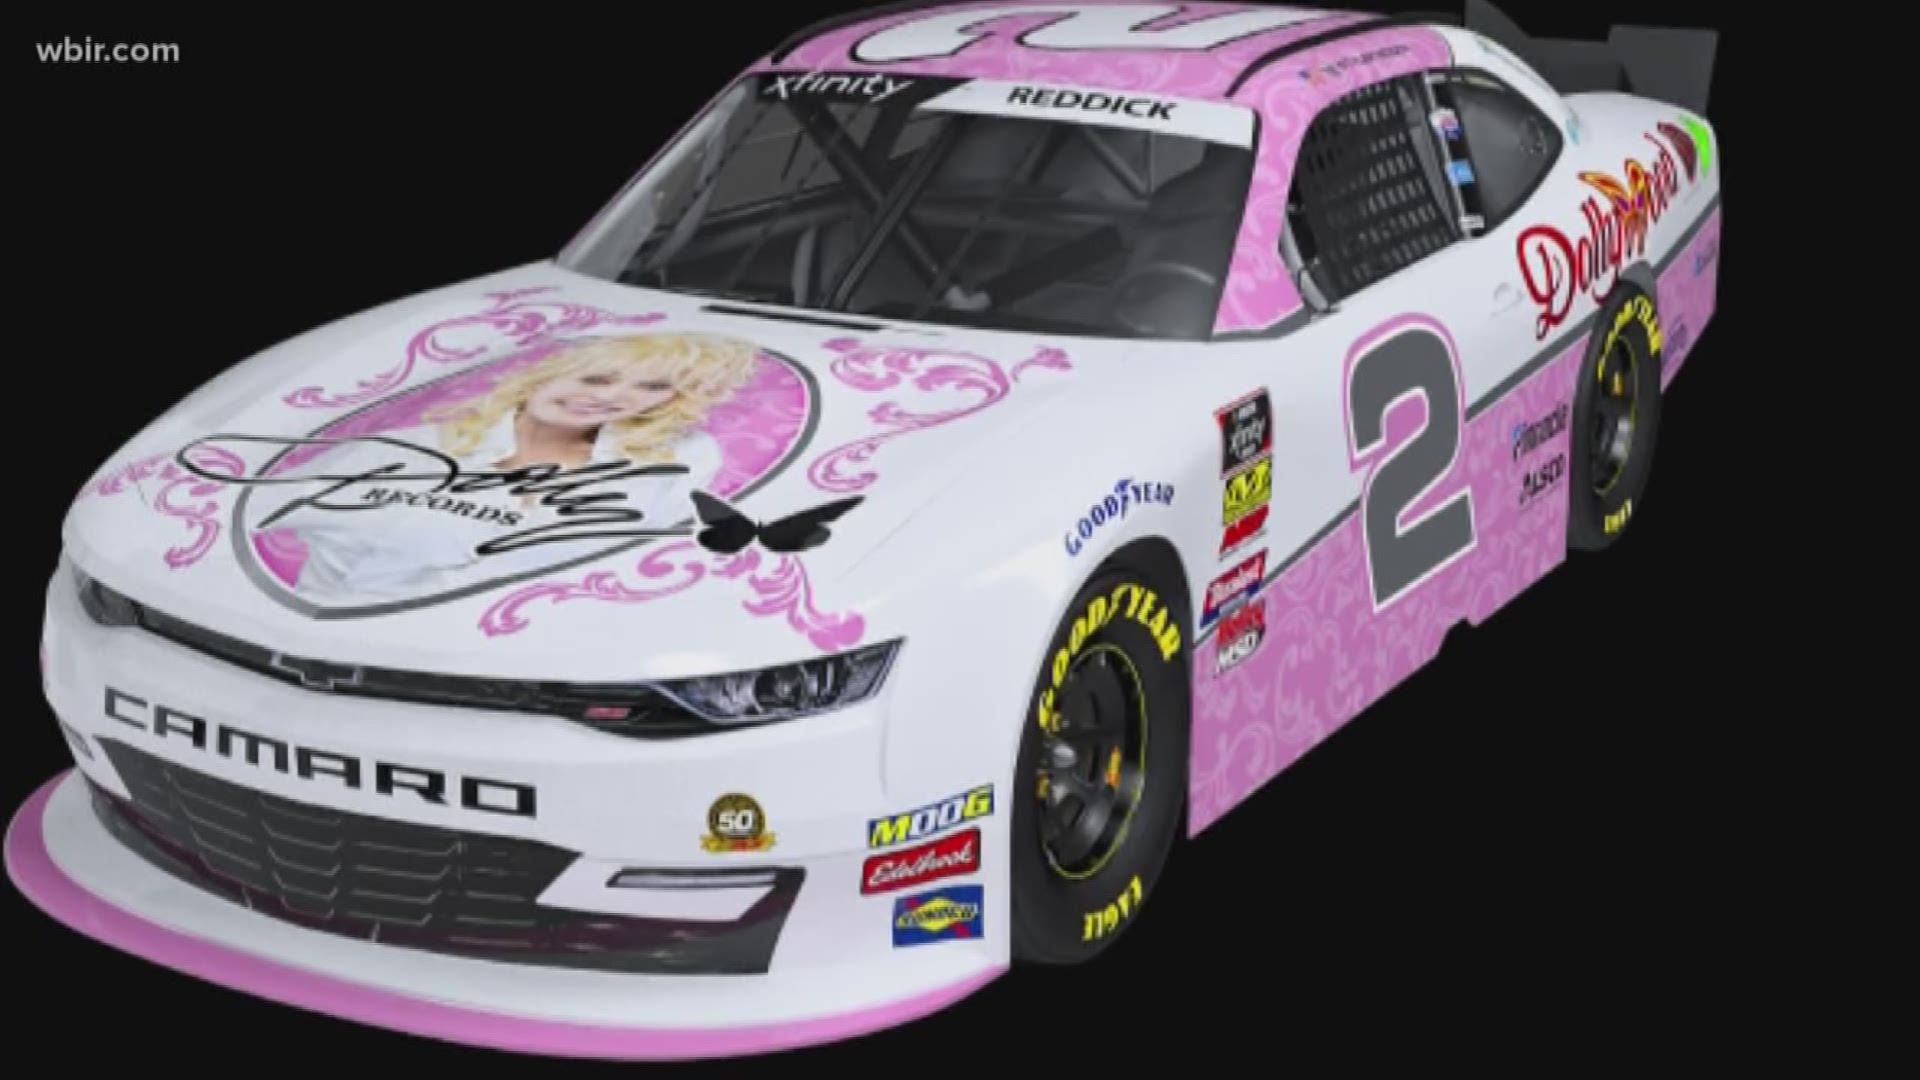 Dolly Parton's photo will be prominently displayed on the hood of NASCAR Xfinity Series driver Tyler Reddick's racecar, and he's hoping she'll bring him some good luck.